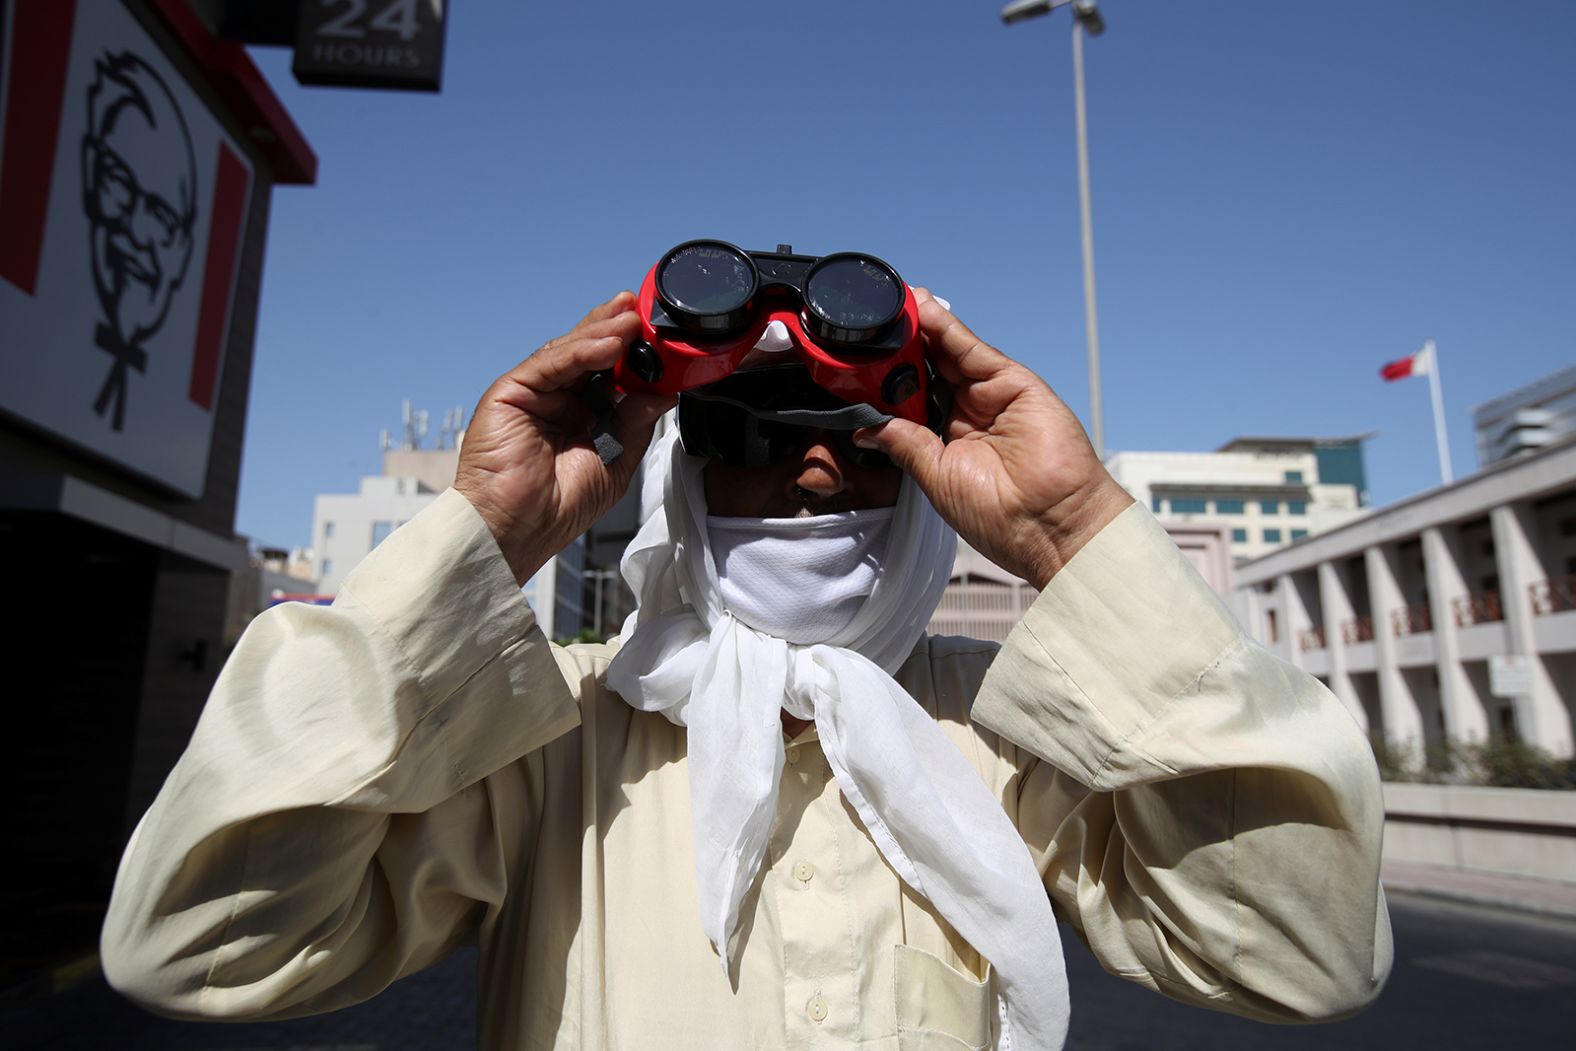 A man uses special protective glasses to monitor the annular solar eclipse in Manama, Bahrain.